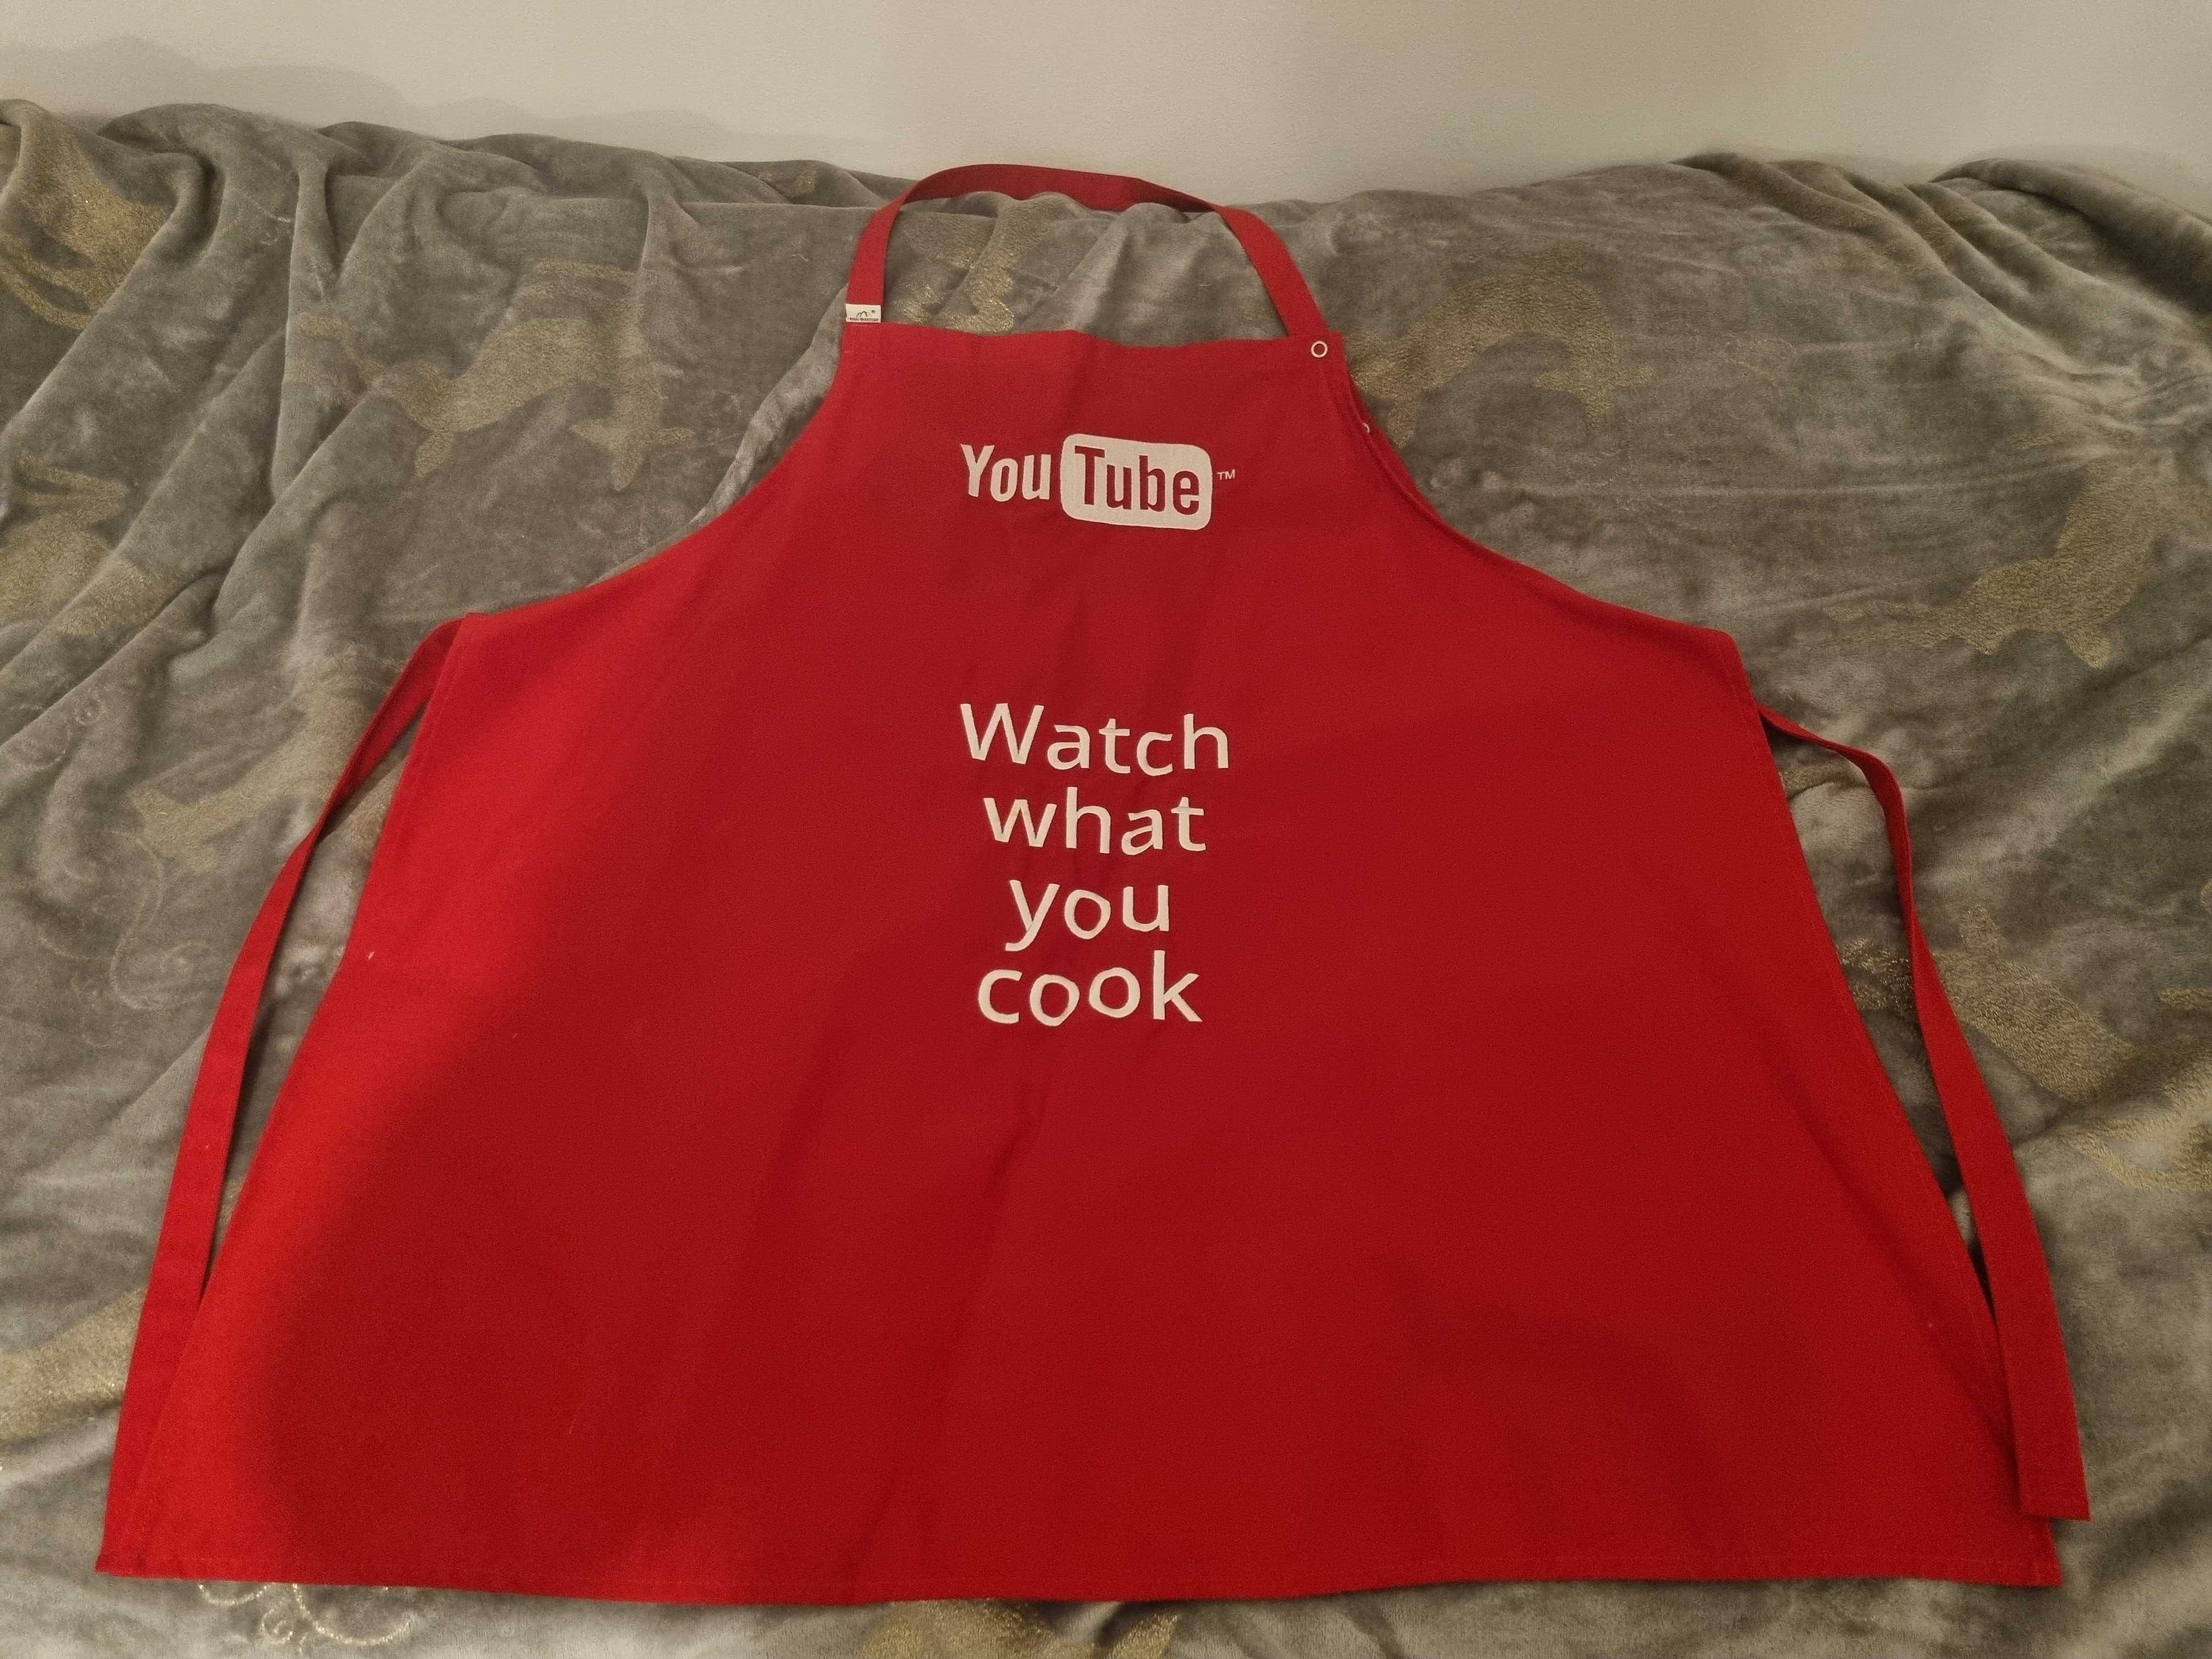 Fartuch kuchenny YouTube "Watch what you cook"